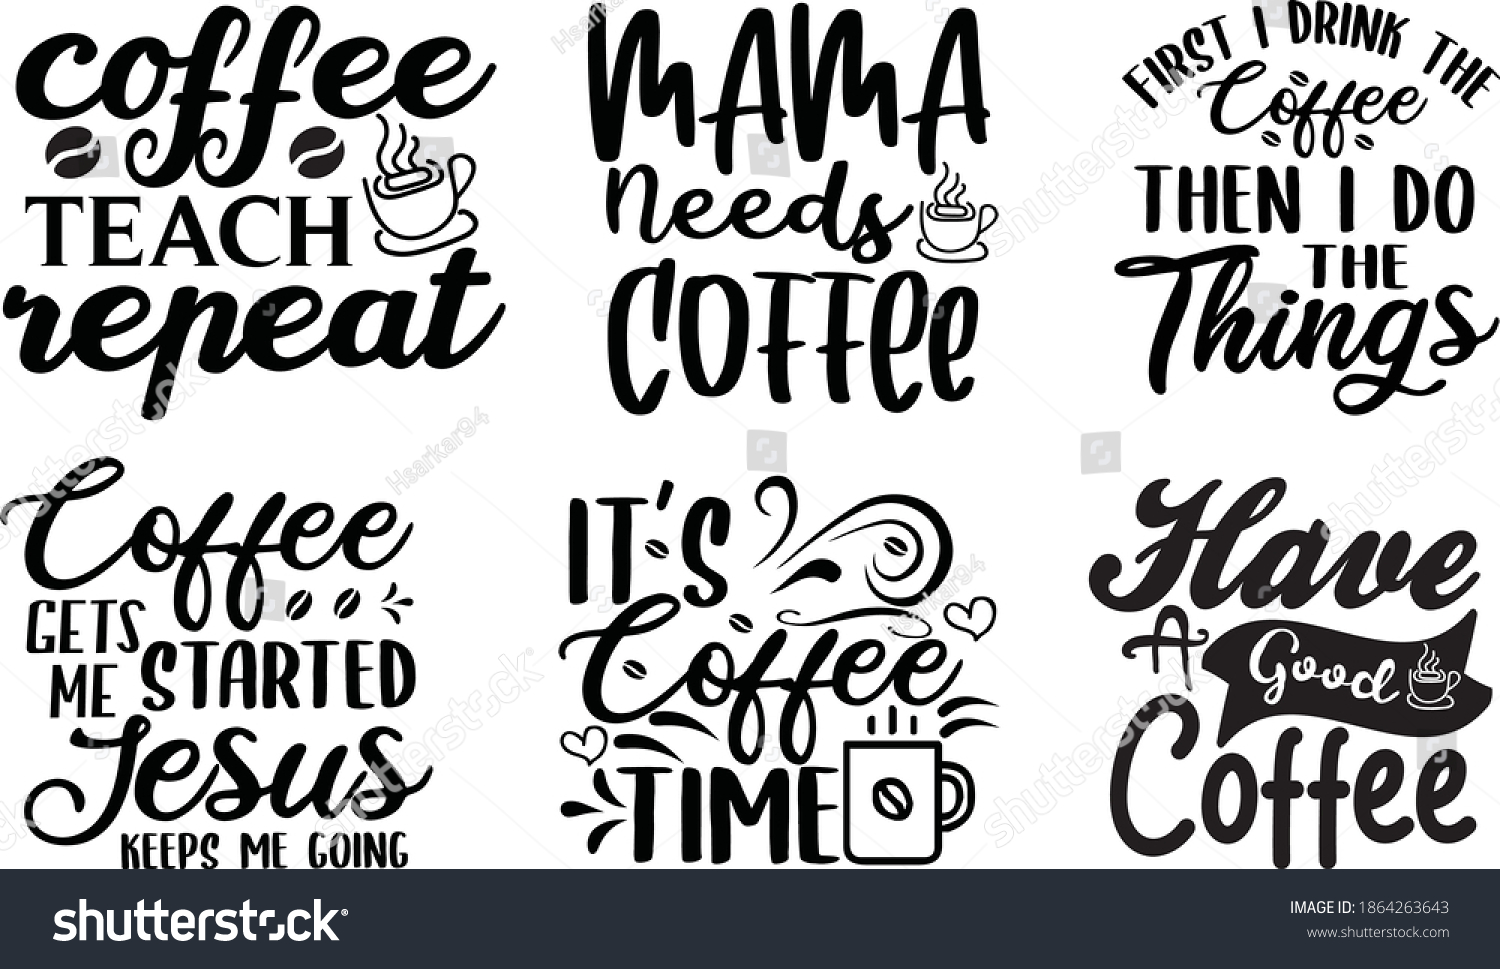 SVG of coffee quotes design vector  illustration on white background EPS. 10 svg